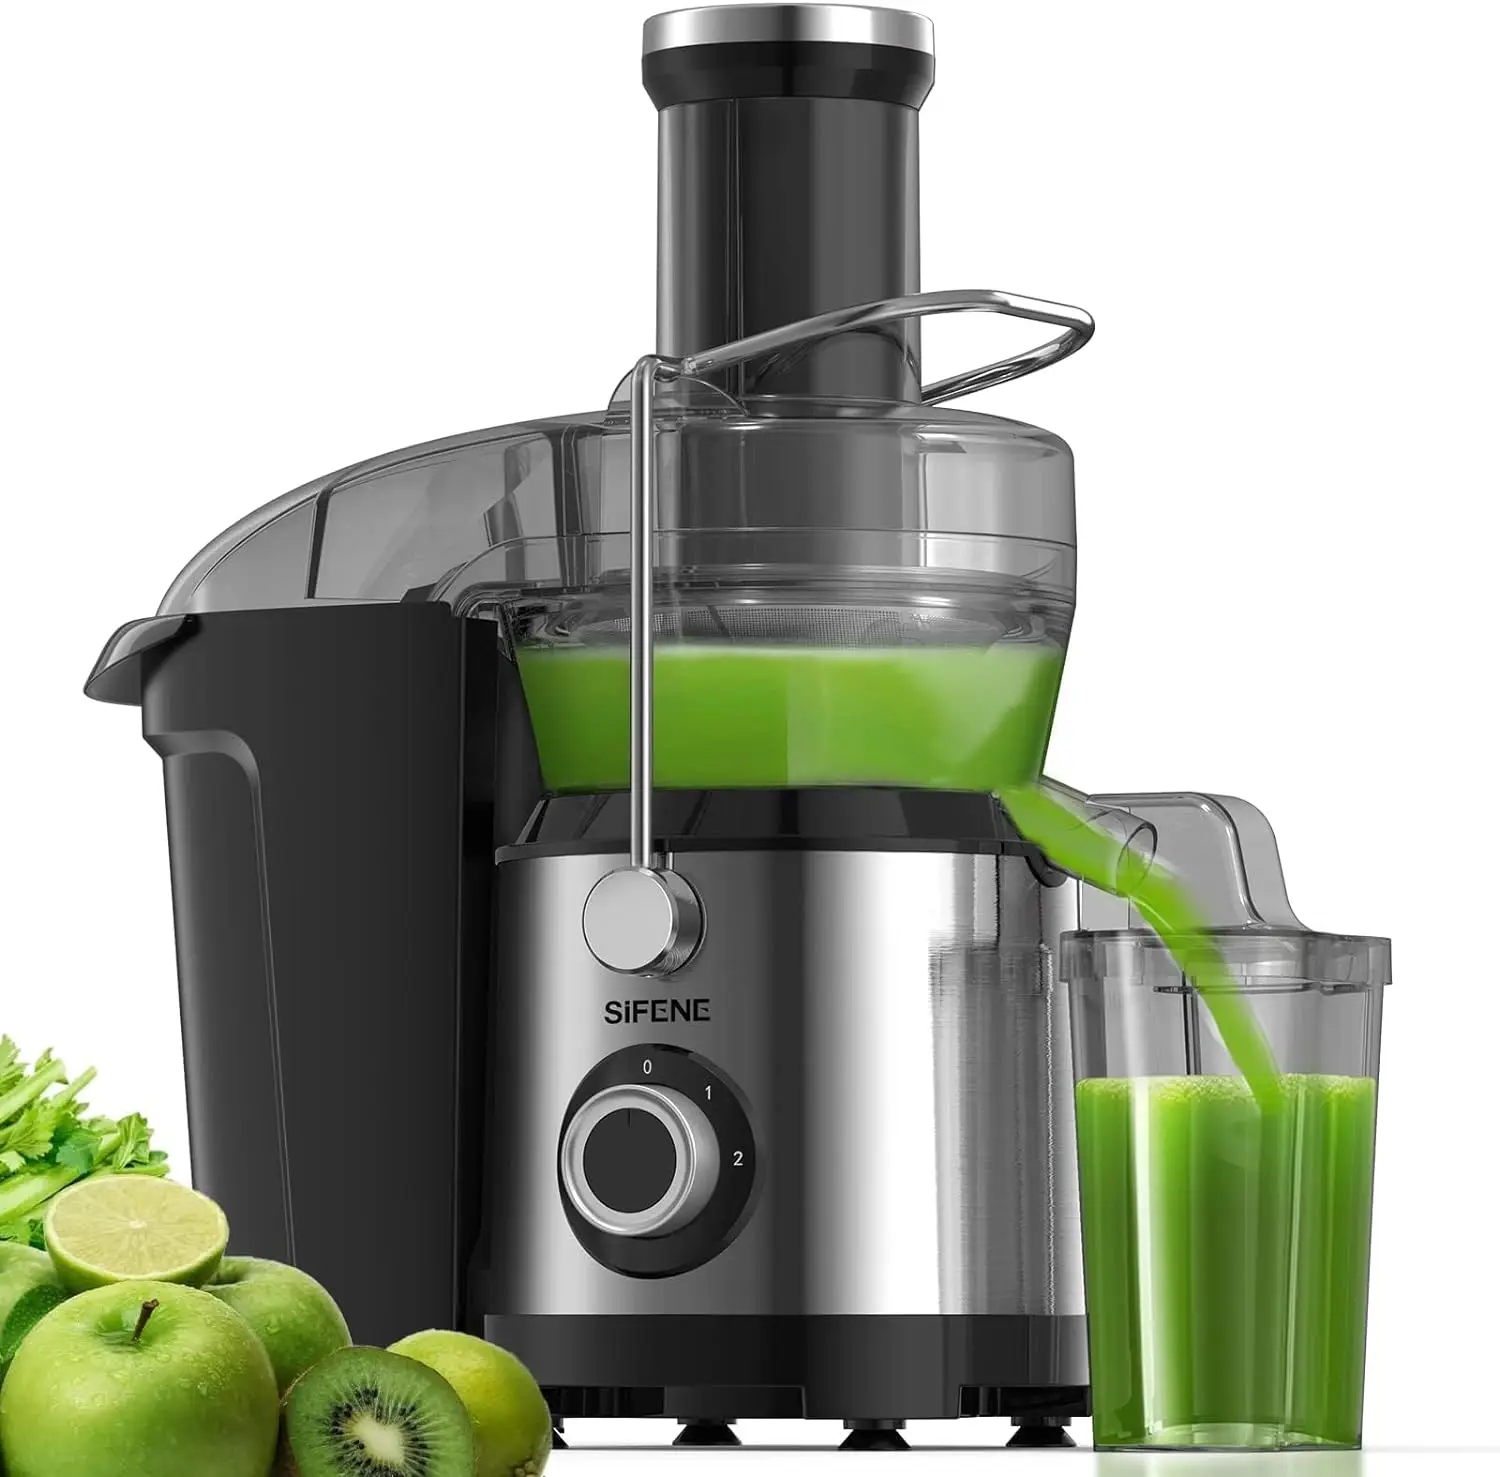 

Machine, 1300W(Peak) Moto Larger 3.2" Mouth Centrifugal Juicer Extractor Maker, Juice Squeezer for Whole Fruits and Vegetab Eye